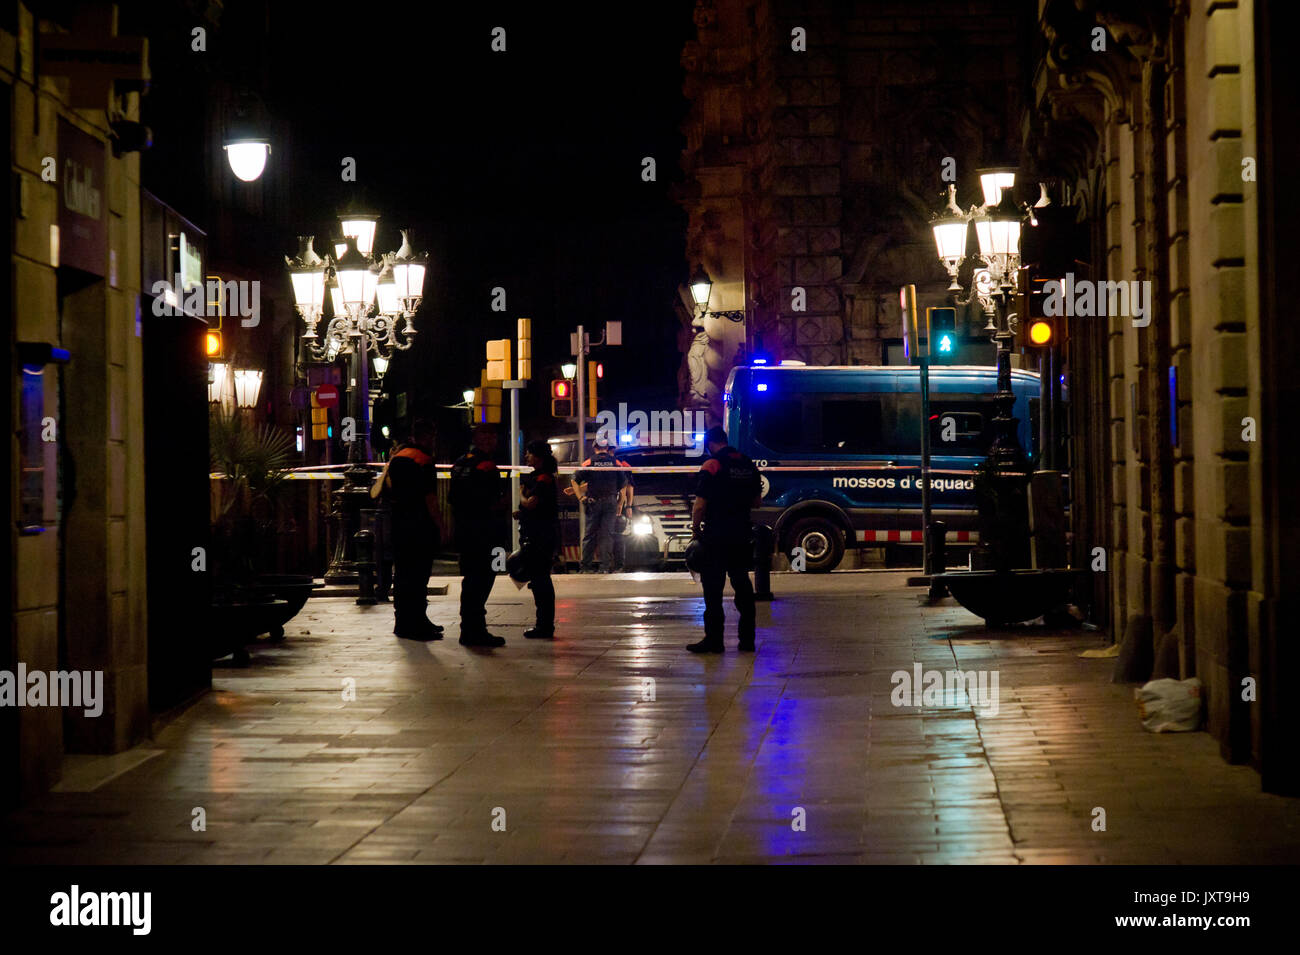 Barcelona, Spain. 17th Aug, 2017. Police officers patrol Las Ramblas area of Barcelona where there has been a terrorist attack. Thirteen people are dead and at least 50 injured after a van rammed into the crowd of Las Ramblas  street in Barcelona. Credit:  Jordi Boixareu/Alamy Live News Stock Photo